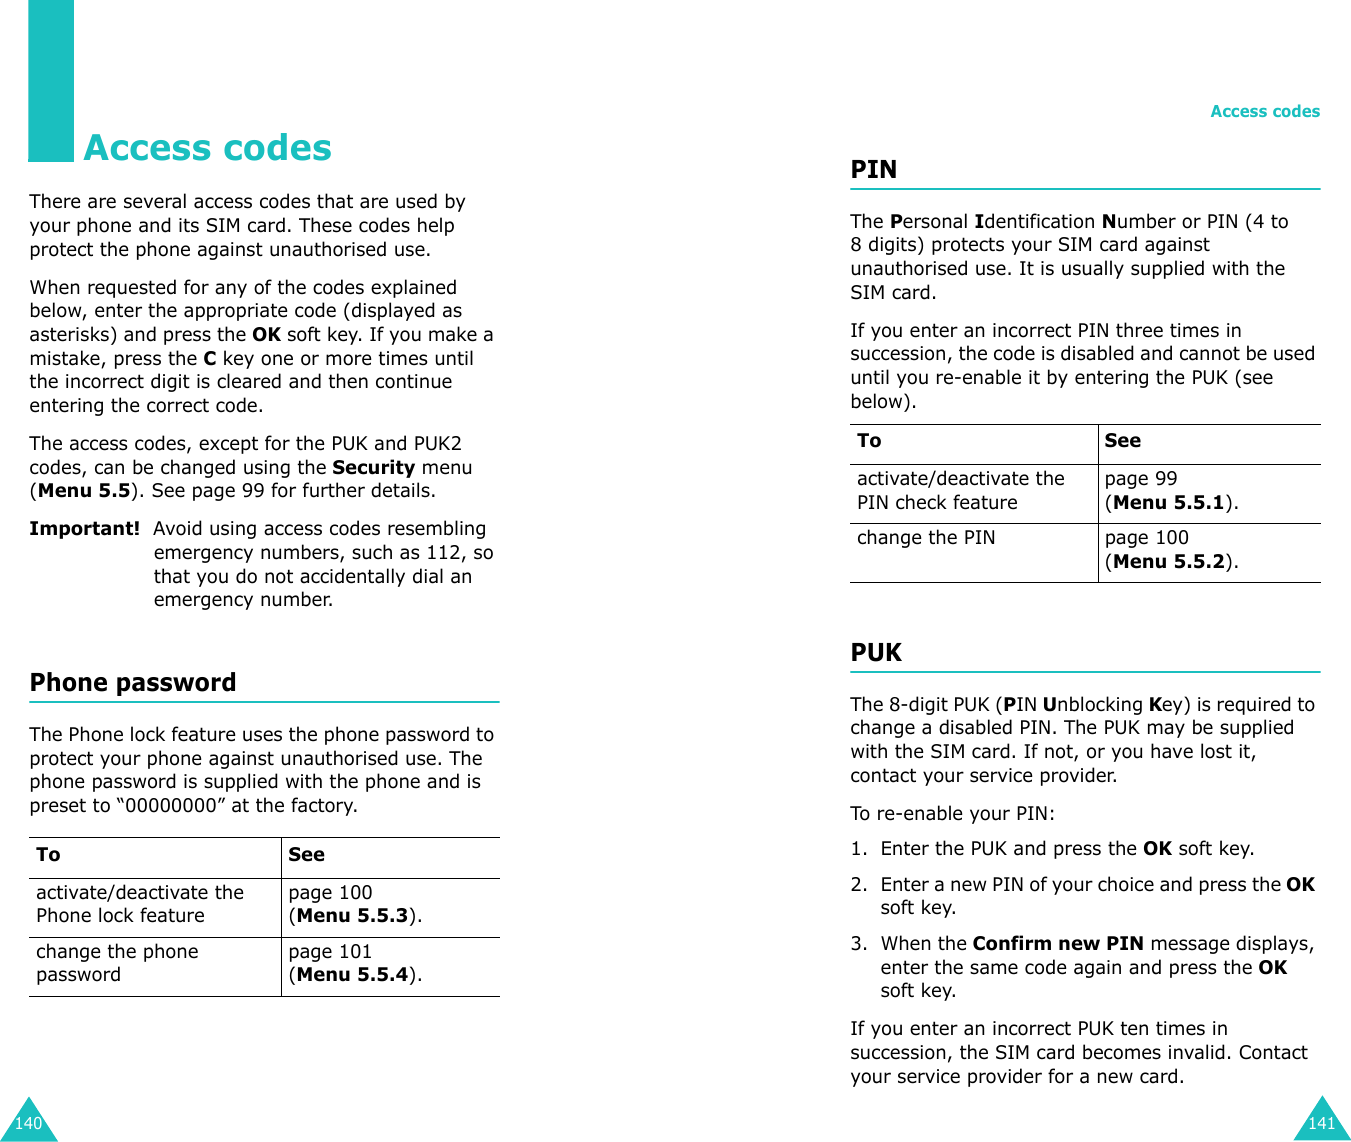 140Access codesThere are several access codes that are used by your phone and its SIM card. These codes help  protect the phone against unauthorised use.When requested for any of the codes explained below, enter the appropriate code (displayed as asterisks) and press the OK soft key. If you make a mistake, press the C key one or more times until the incorrect digit is cleared and then continue entering the correct code.The access codes, except for the PUK and PUK2 codes, can be changed using the Security menu (Menu 5.5). See page 99 for further details.Important!  Avoid using access codes resembling emergency numbers, such as 112, so that you do not accidentally dial an emergency number.Phone passwordThe Phone lock feature uses the phone password to protect your phone against unauthorised use. The phone password is supplied with the phone and is preset to “00000000” at the factory.To Seeactivate/deactivate the Phone lock featurepage 100(Menu 5.5.3).change the phone passwordpage 101(Menu 5.5.4).Access codes141PINThe Personal Identification Number or PIN (4 to 8 digits) protects your SIM card against unauthorised use. It is usually supplied with the SIM card.If you enter an incorrect PIN three times in succession, the code is disabled and cannot be used until you re-enable it by entering the PUK (see below).PUKThe 8-digit PUK (PIN Unblocking Key) is required to change a disabled PIN. The PUK may be supplied with the SIM card. If not, or you have lost it, contact your service provider.To re-enable your PIN:1. Enter the PUK and press the OK soft key.2. Enter a new PIN of your choice and press the OK soft key.3. When the Confirm new PIN message displays, enter the same code again and press the OK soft key.If you enter an incorrect PUK ten times in succession, the SIM card becomes invalid. Contact your service provider for a new card.To Seeactivate/deactivate the PIN check featurepage 99 (Menu 5.5.1).change the PIN page 100(Menu 5.5.2).